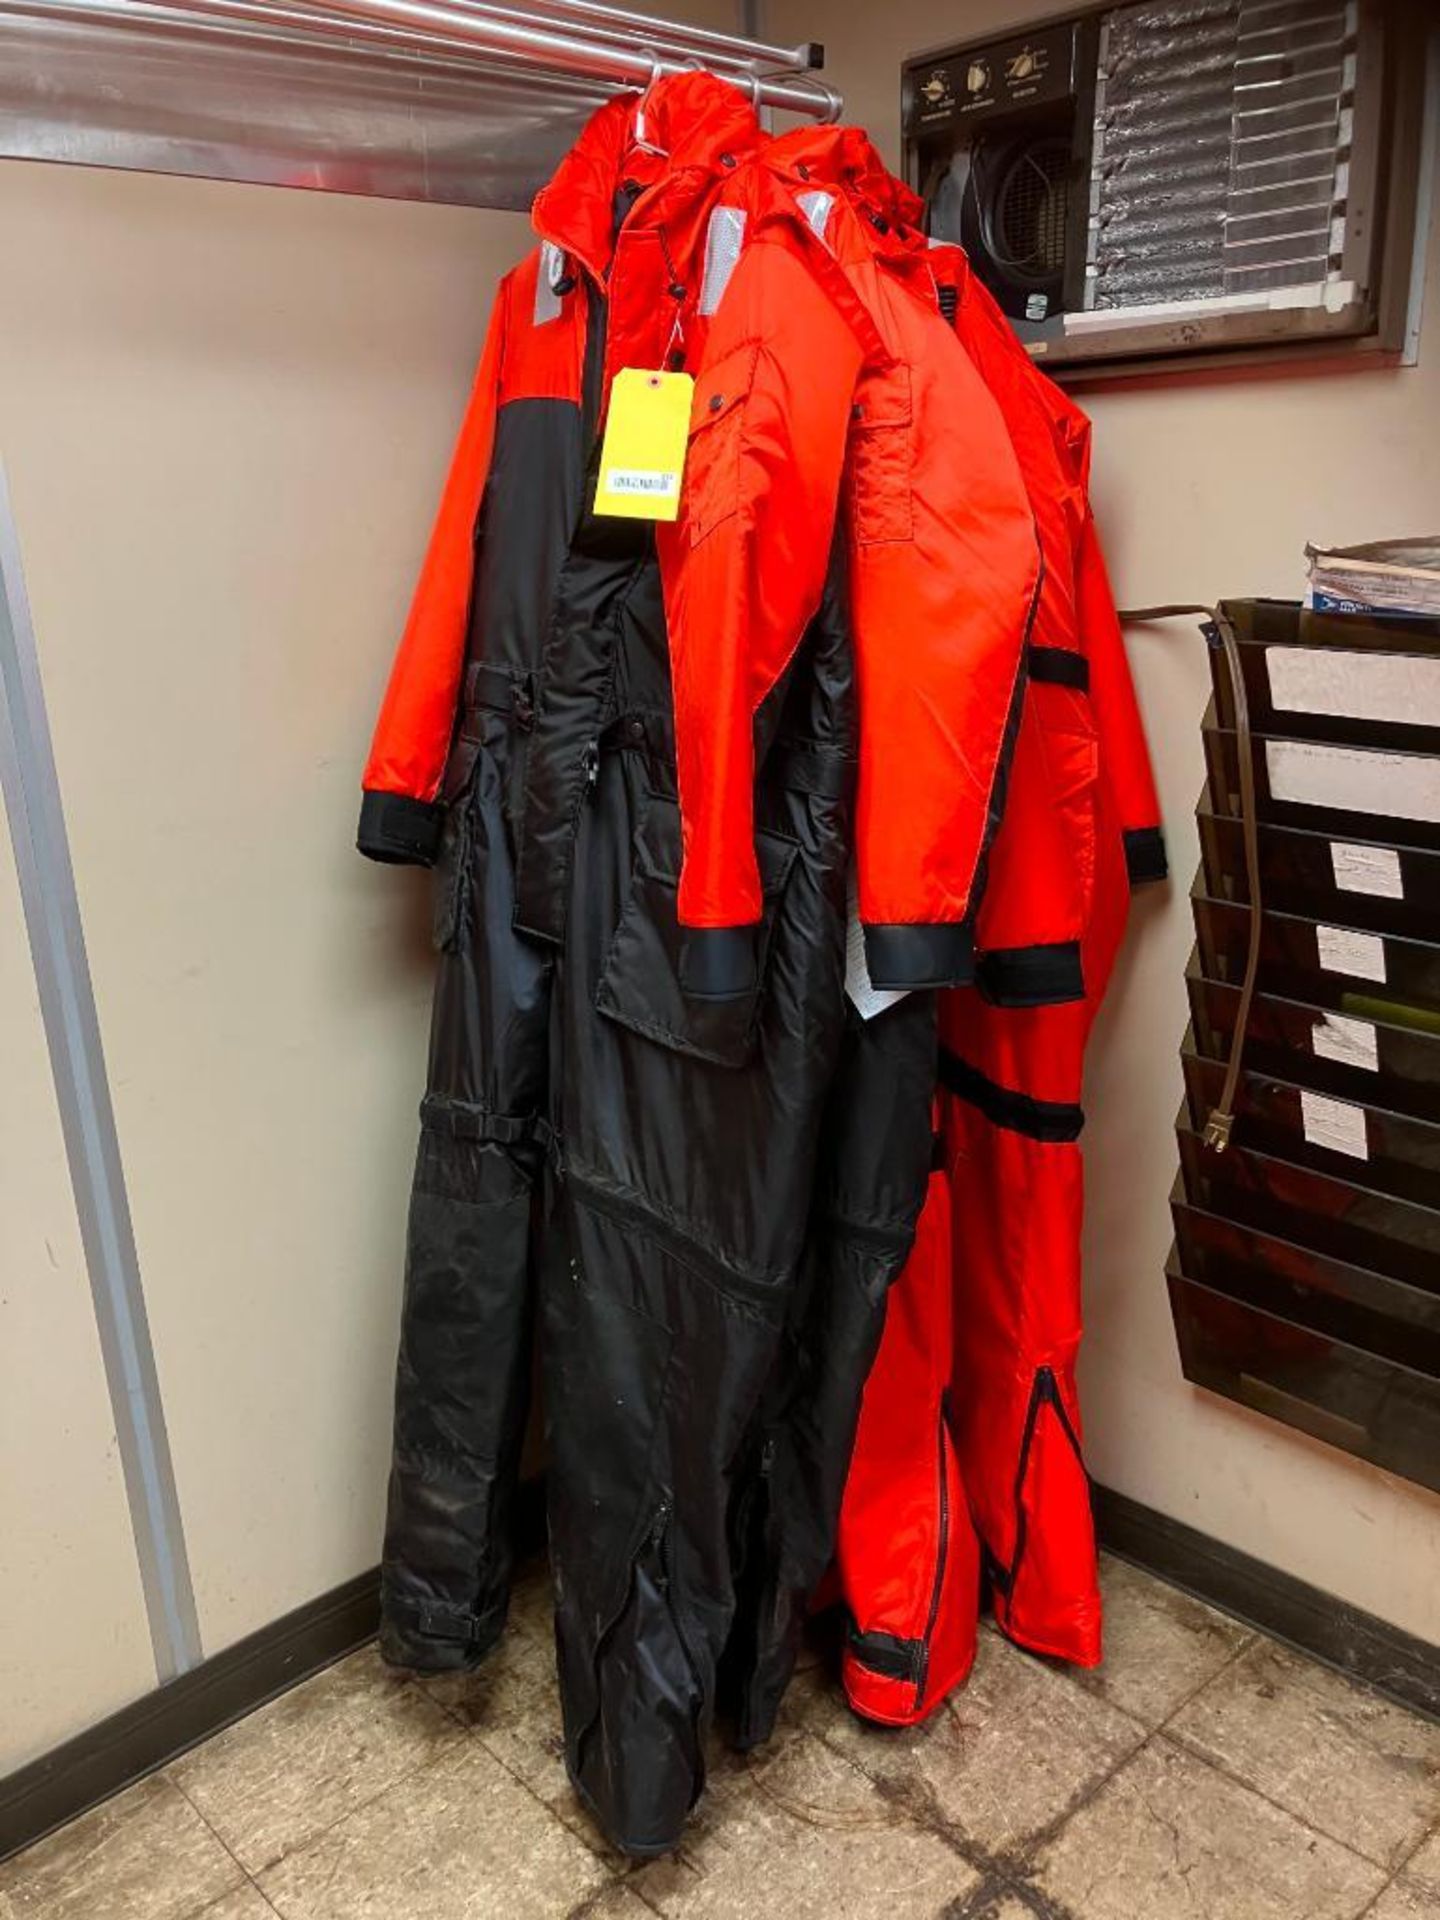 (4) MUSTANG SURVIVAL MS2175 DELUXE ANTI-EXPOSURE WORK SUITS: (2) XX LARGE, (2) XXX LARGE